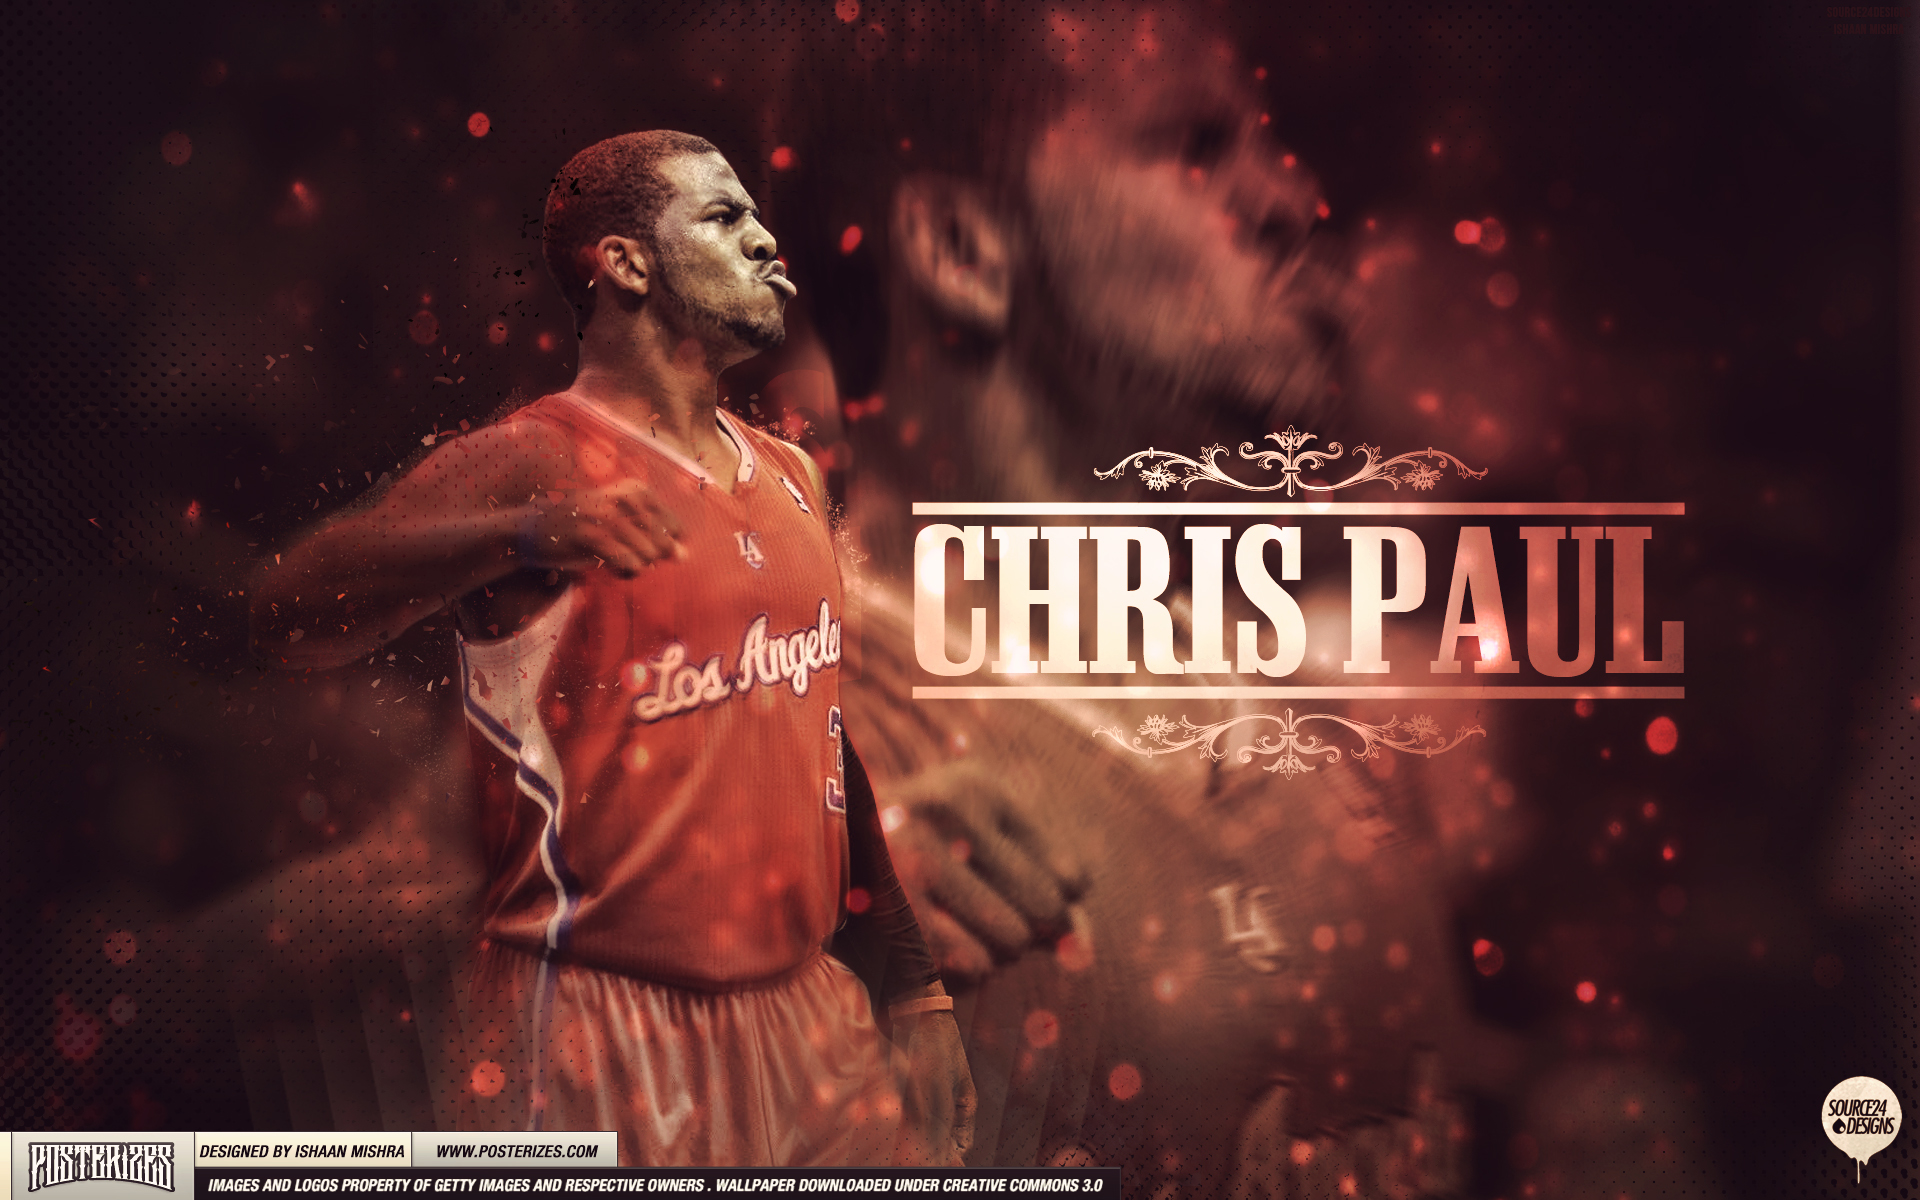 Chris Paul Los Angeles Clippers Wallpaper Posterizes Nba